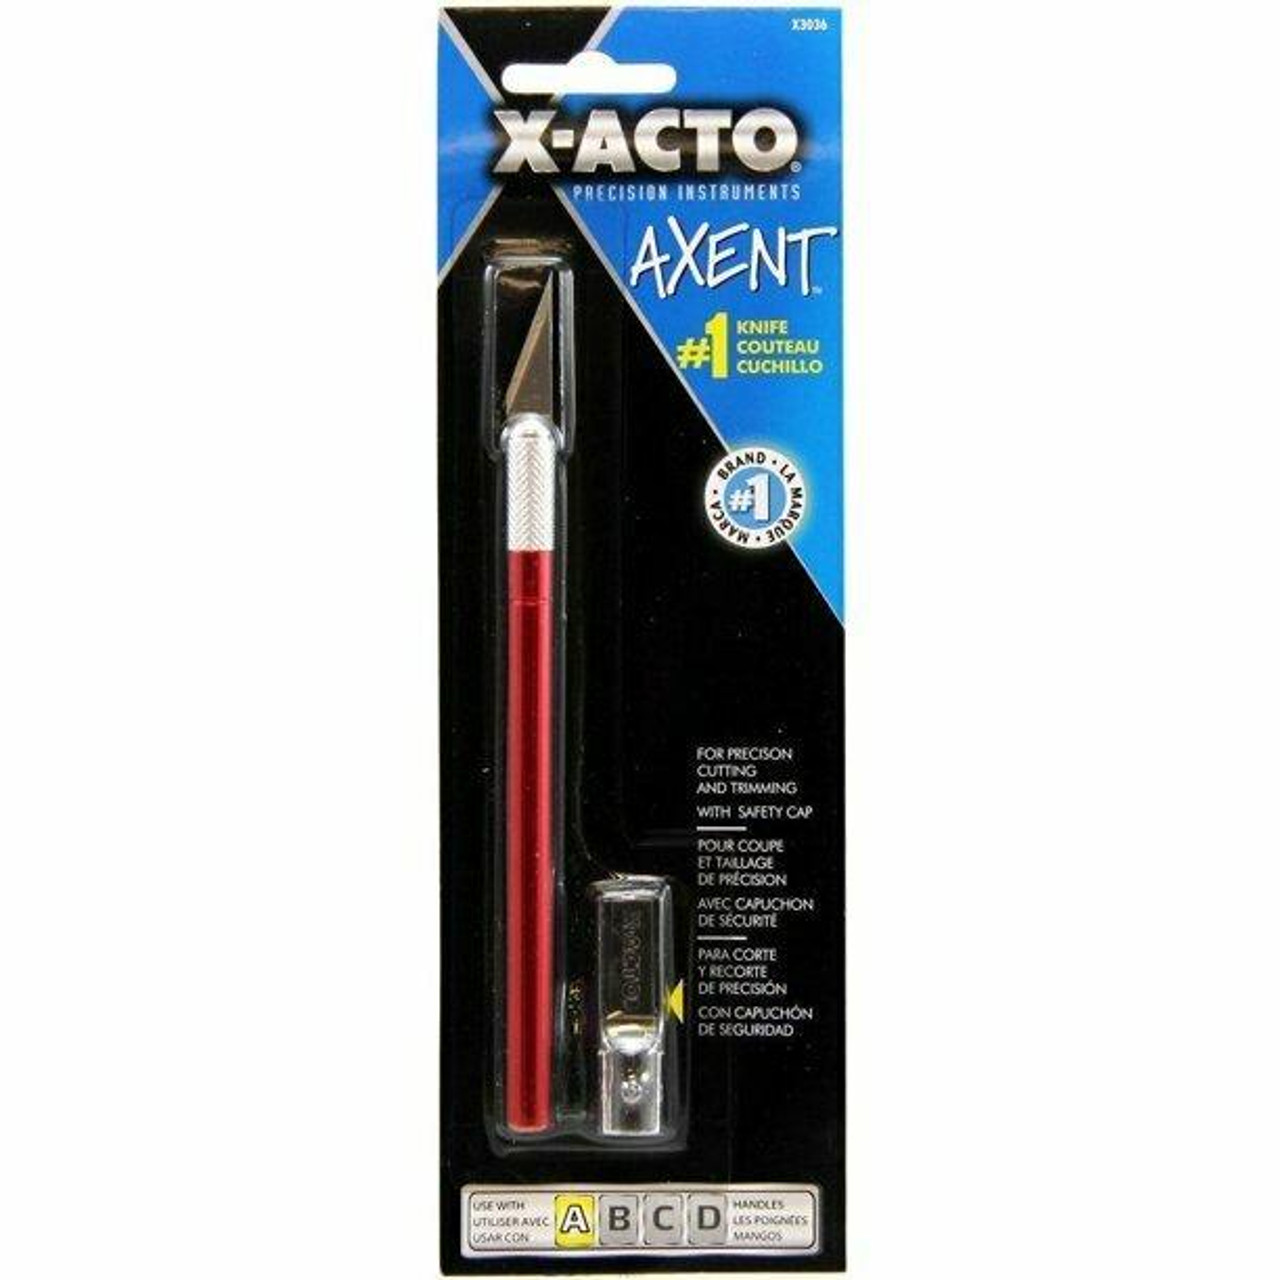 (2) X-ACTO #1 Precision Knife With Safety Caps - Genuine Sealed Packs, Xacto